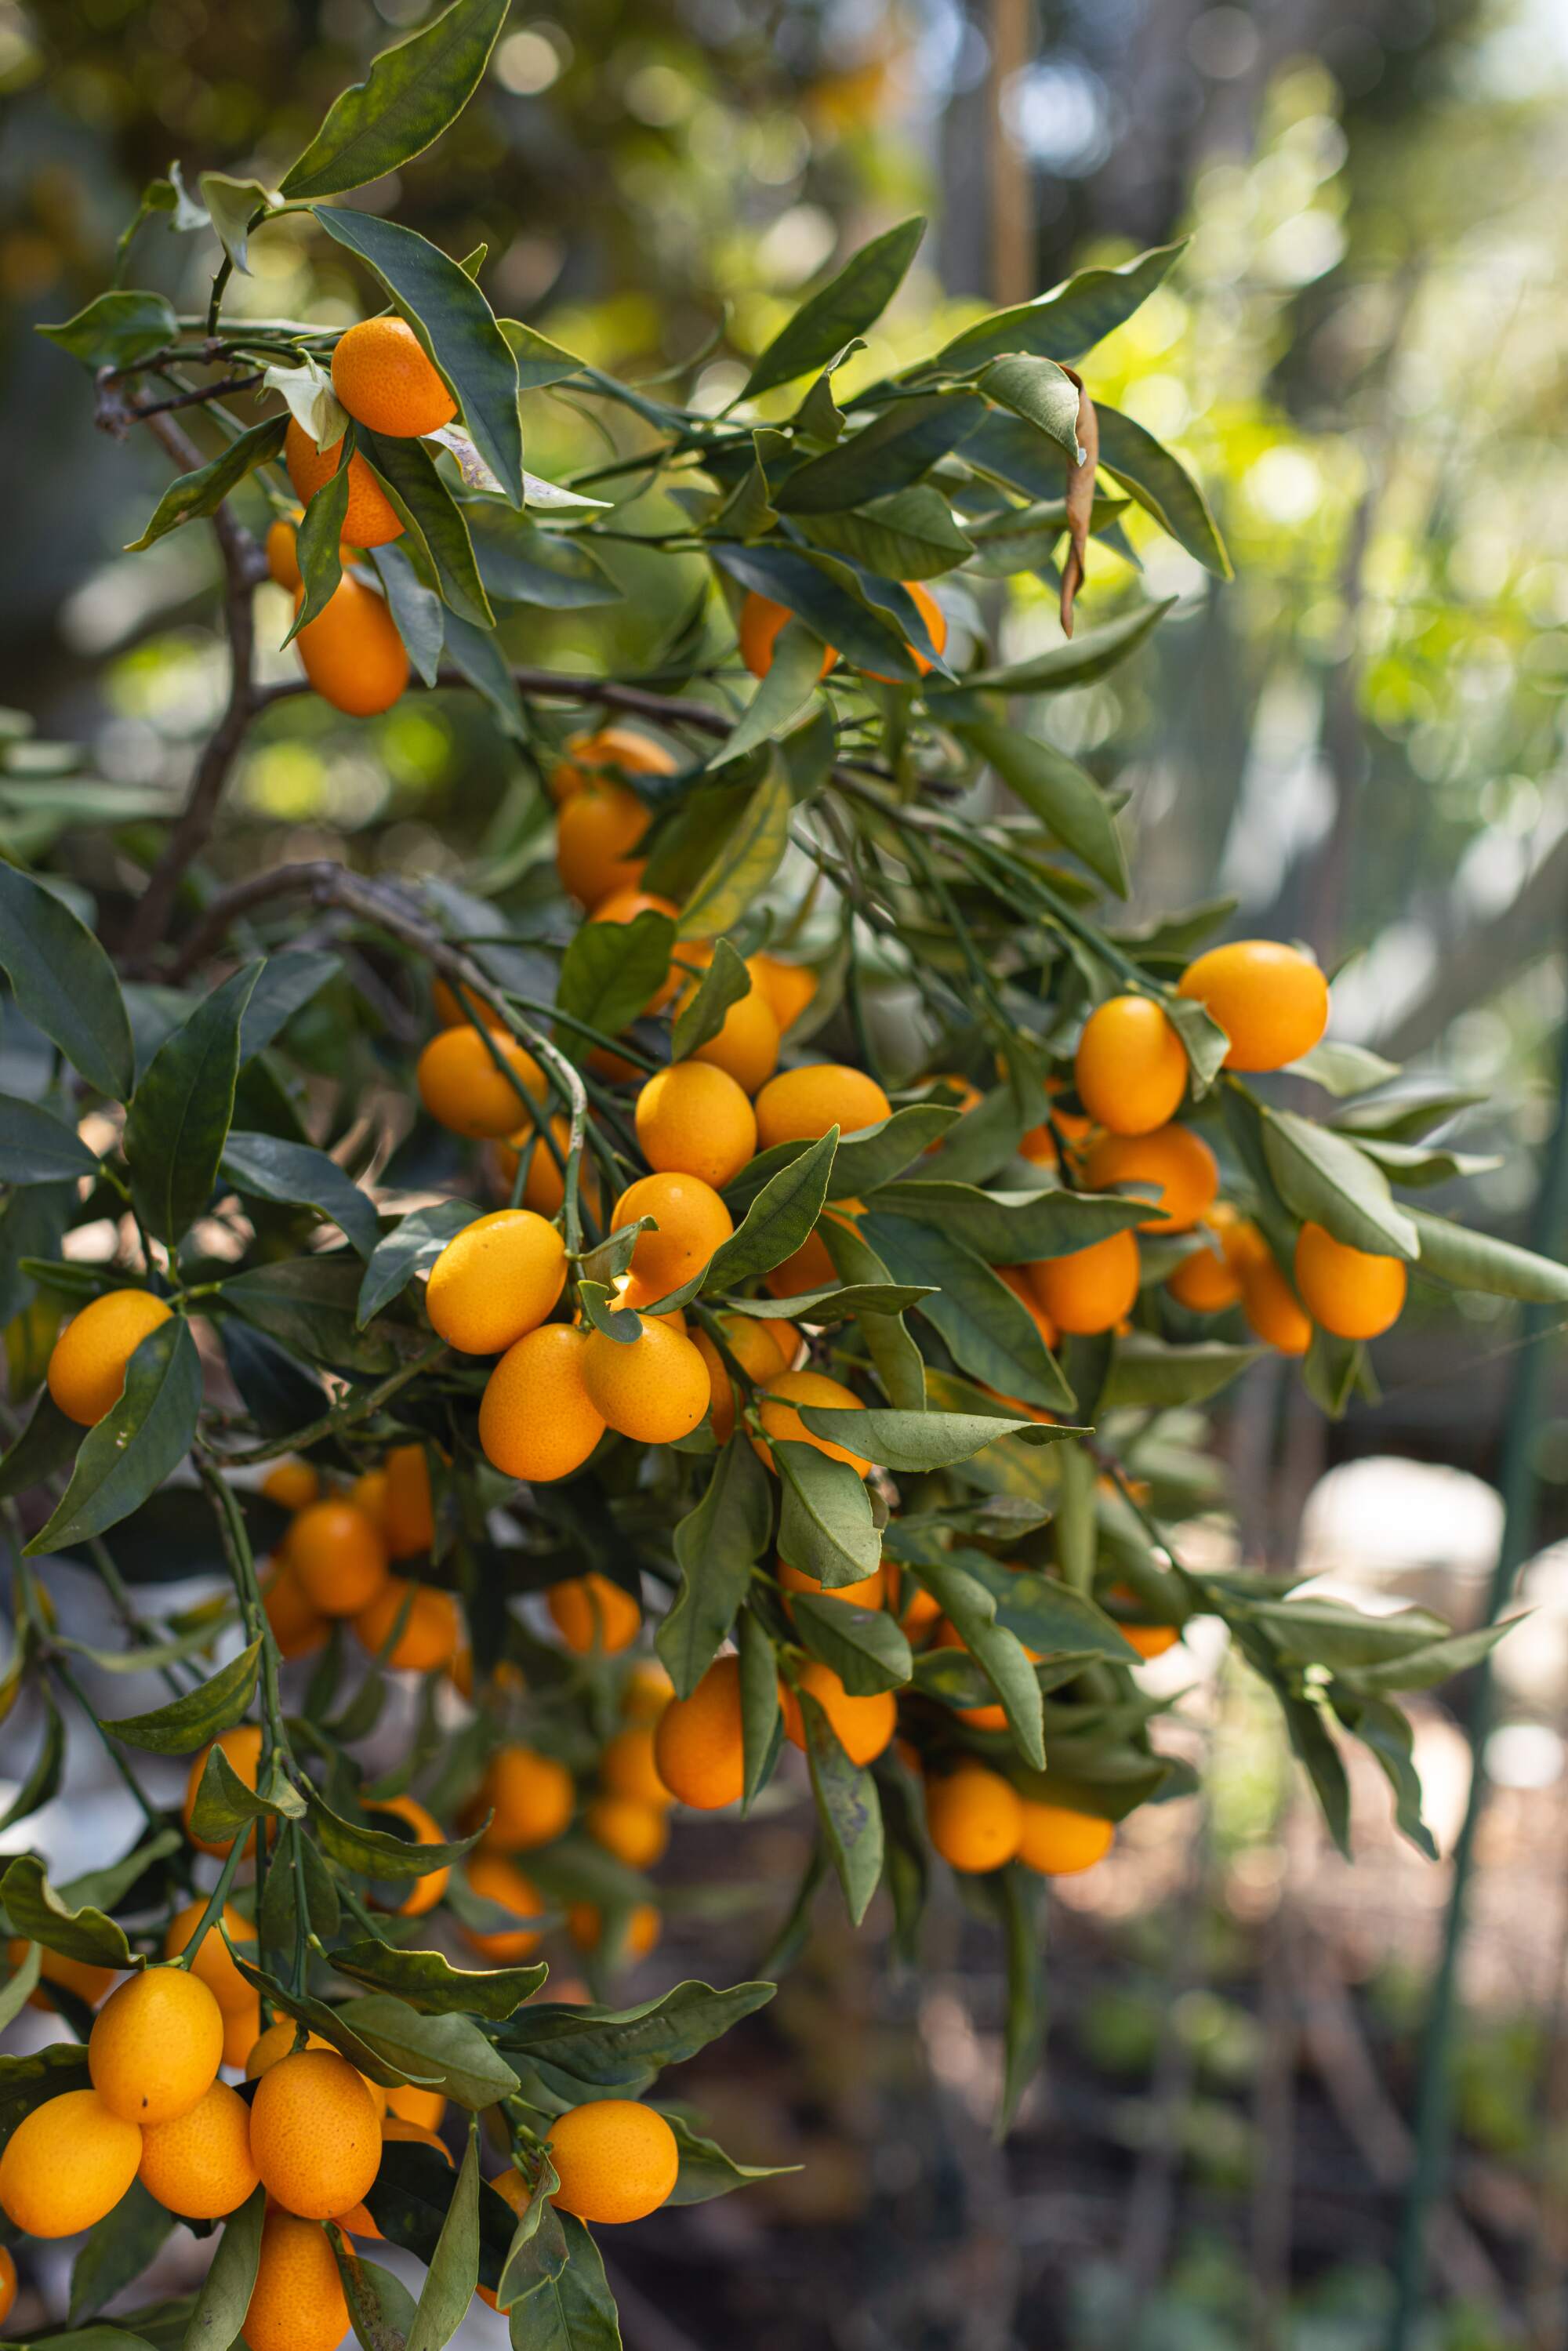 A citrus tree in the garden of Kismet chef Sara Kramer in Los Angeles. (Catherine Dzilenski / For The Times)